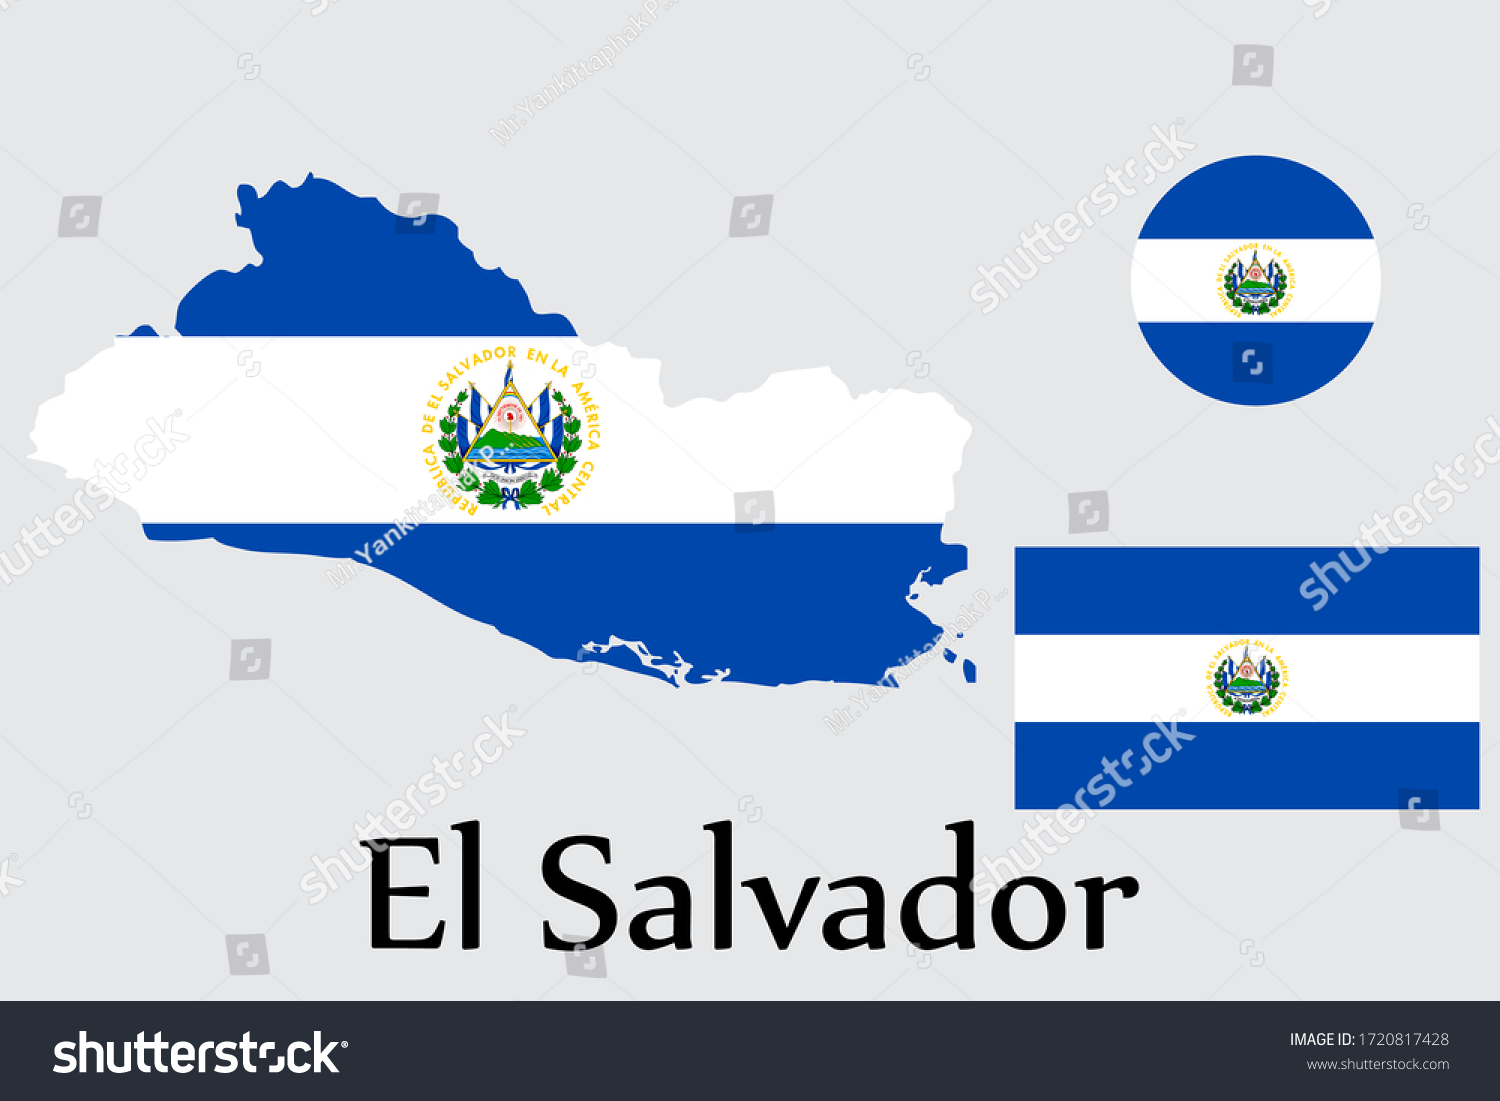 shape-map-and-flag-of-el-salvador-country-eps-royalty-free-stock